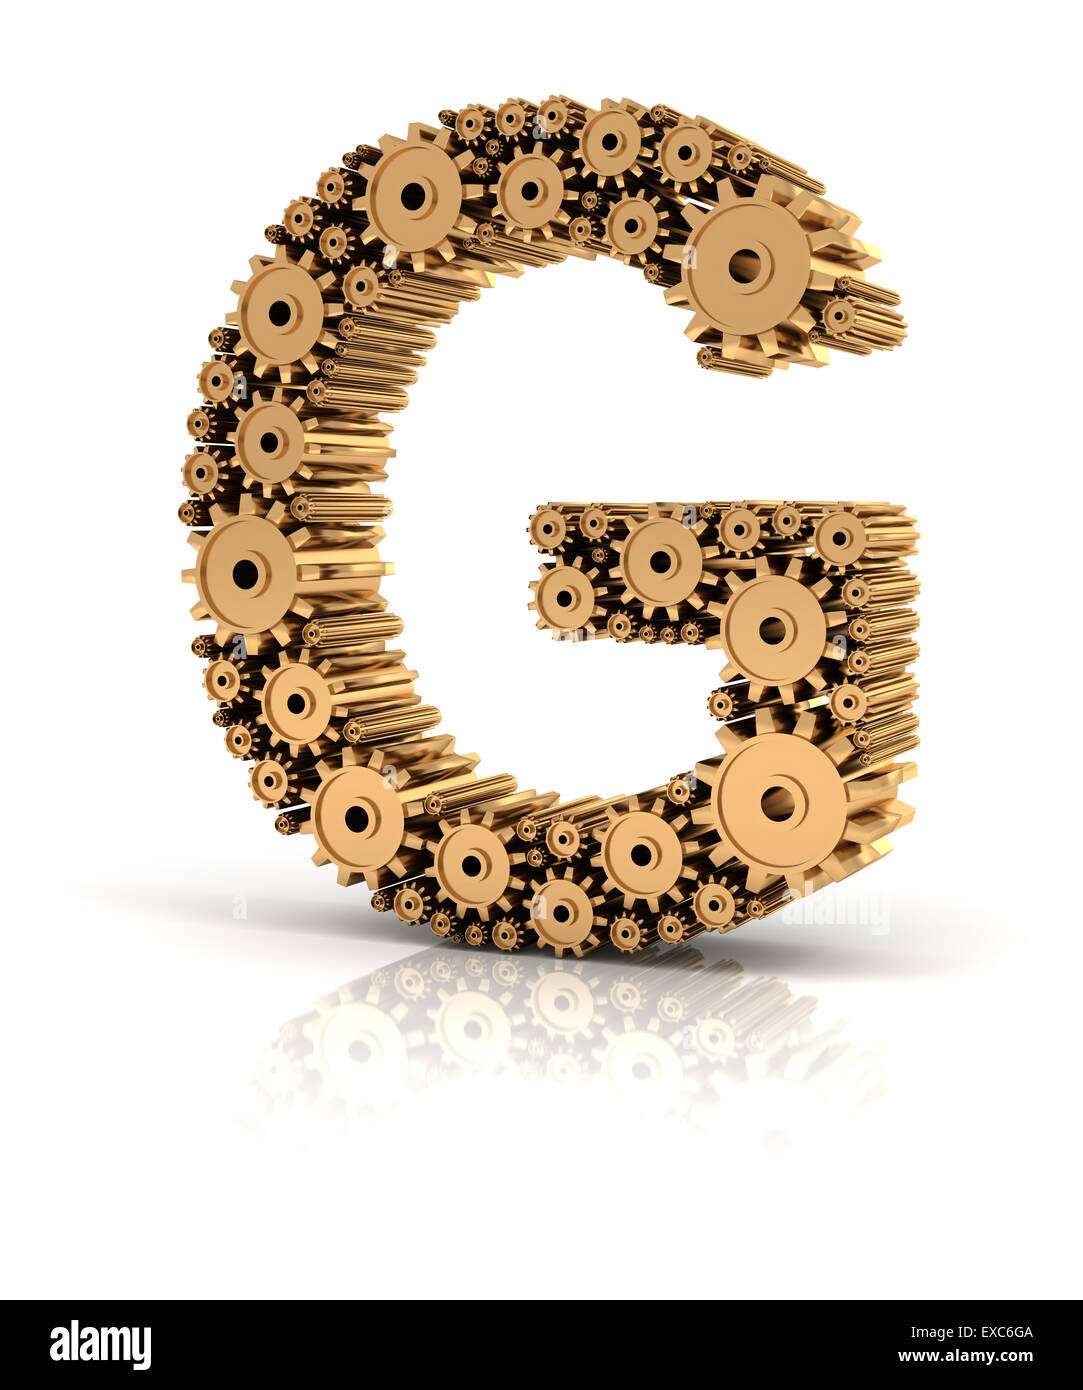 Alphabet G formed by gears Stock Photo